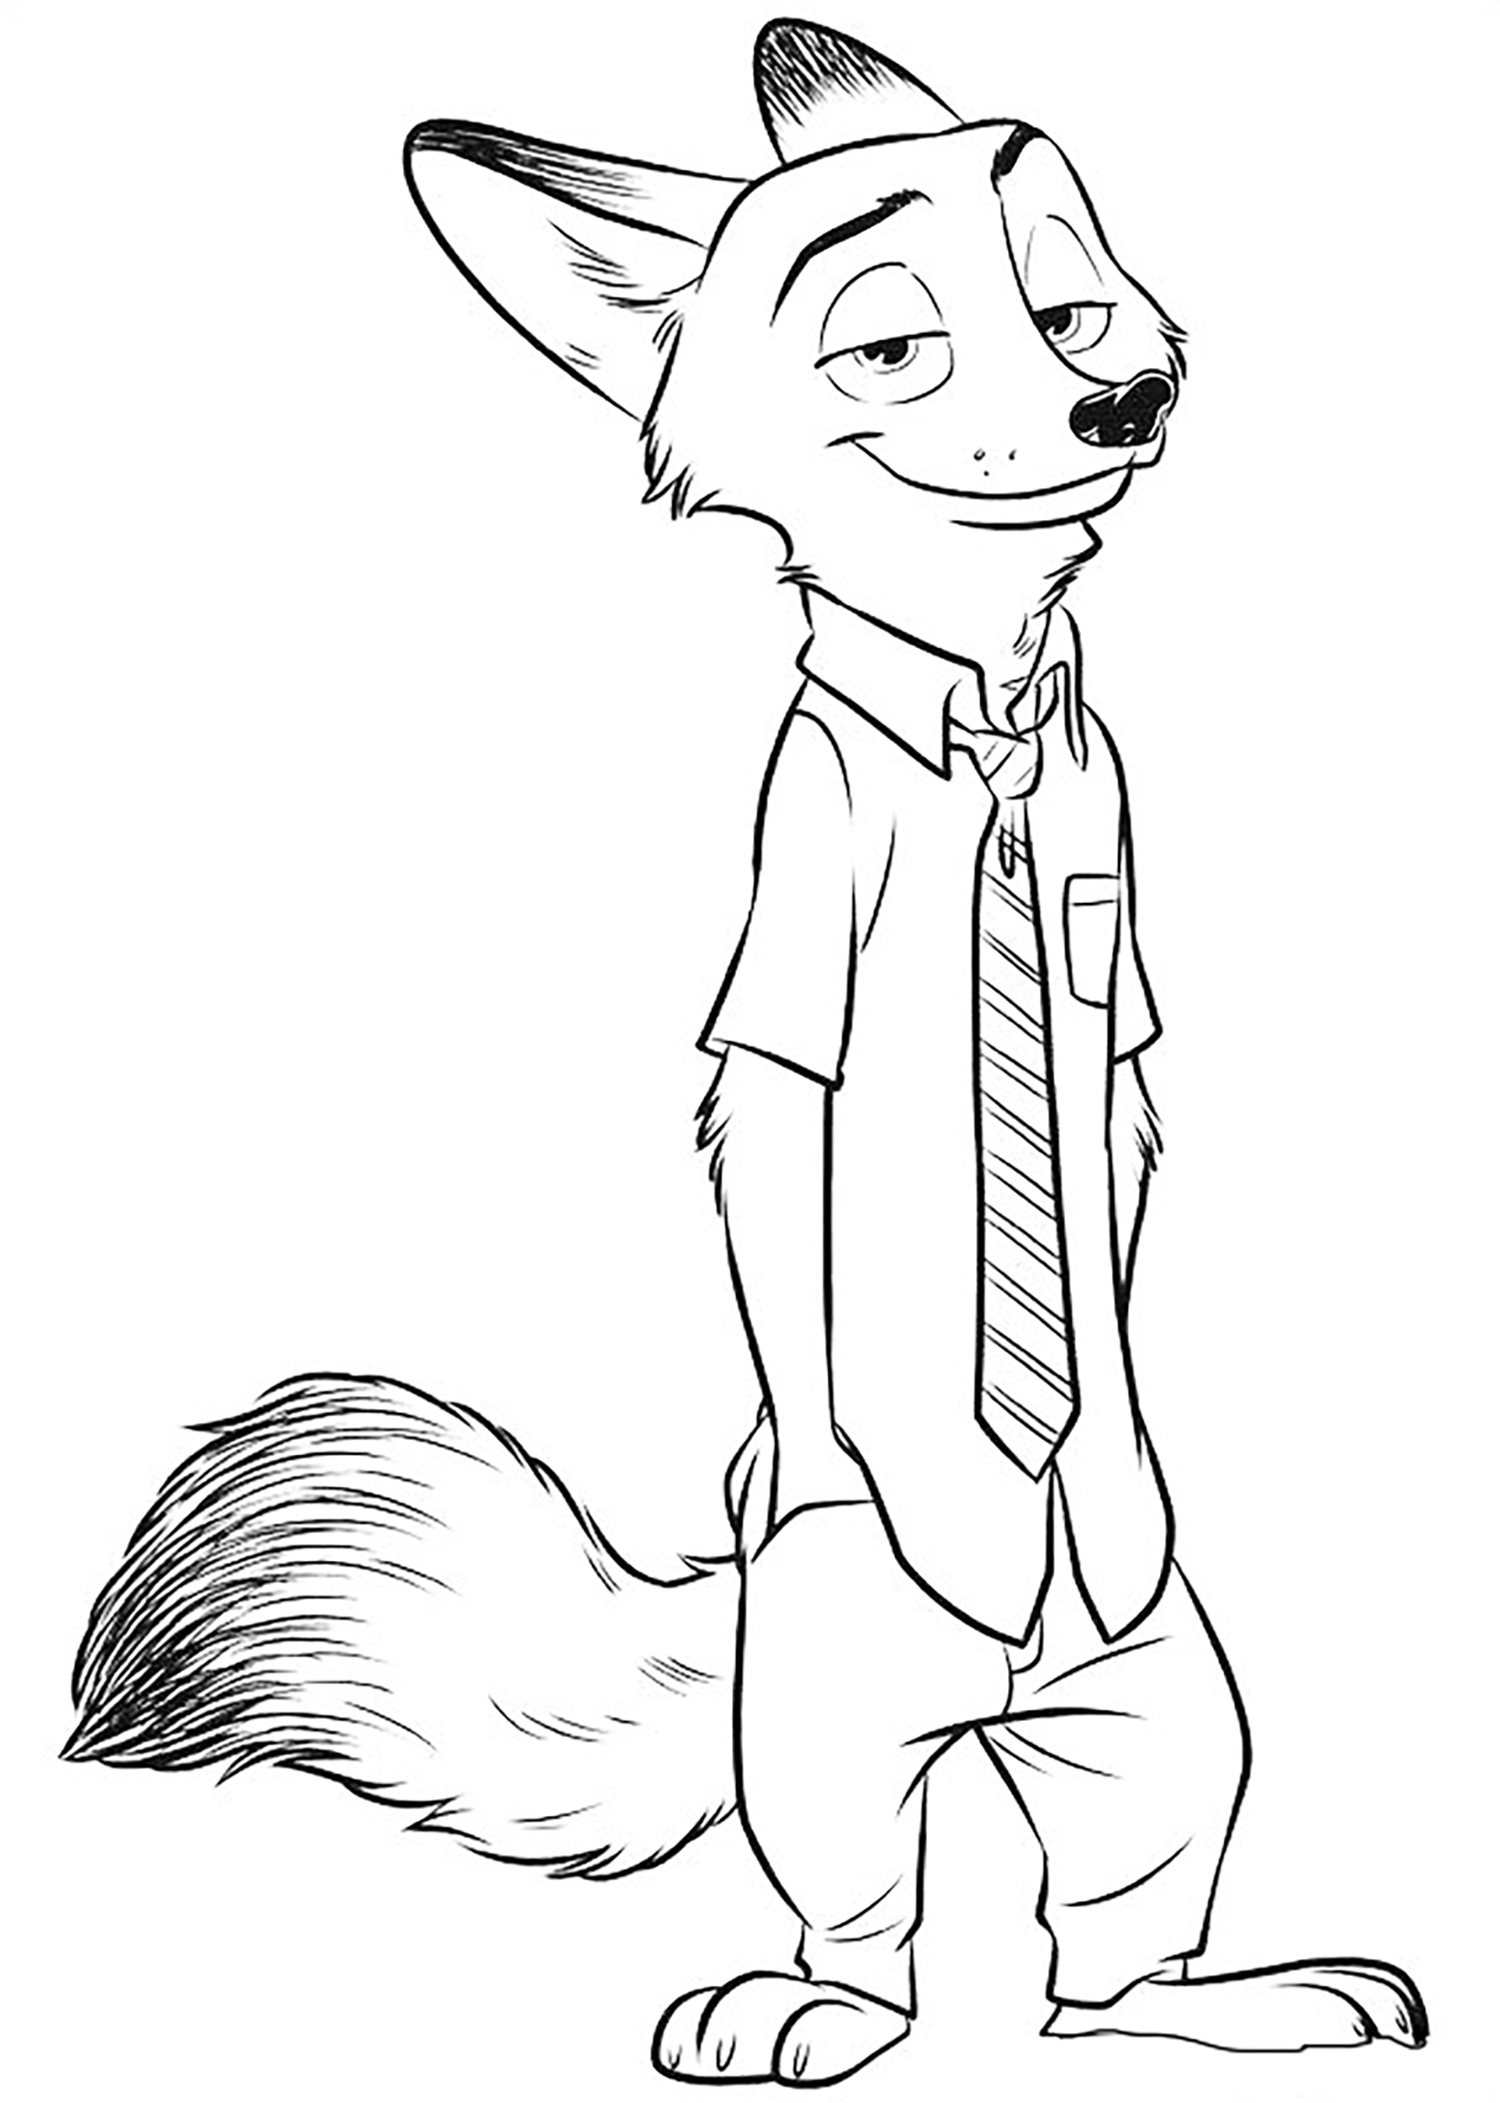 Download Zootopia for children - Zootopia Kids Coloring Pages